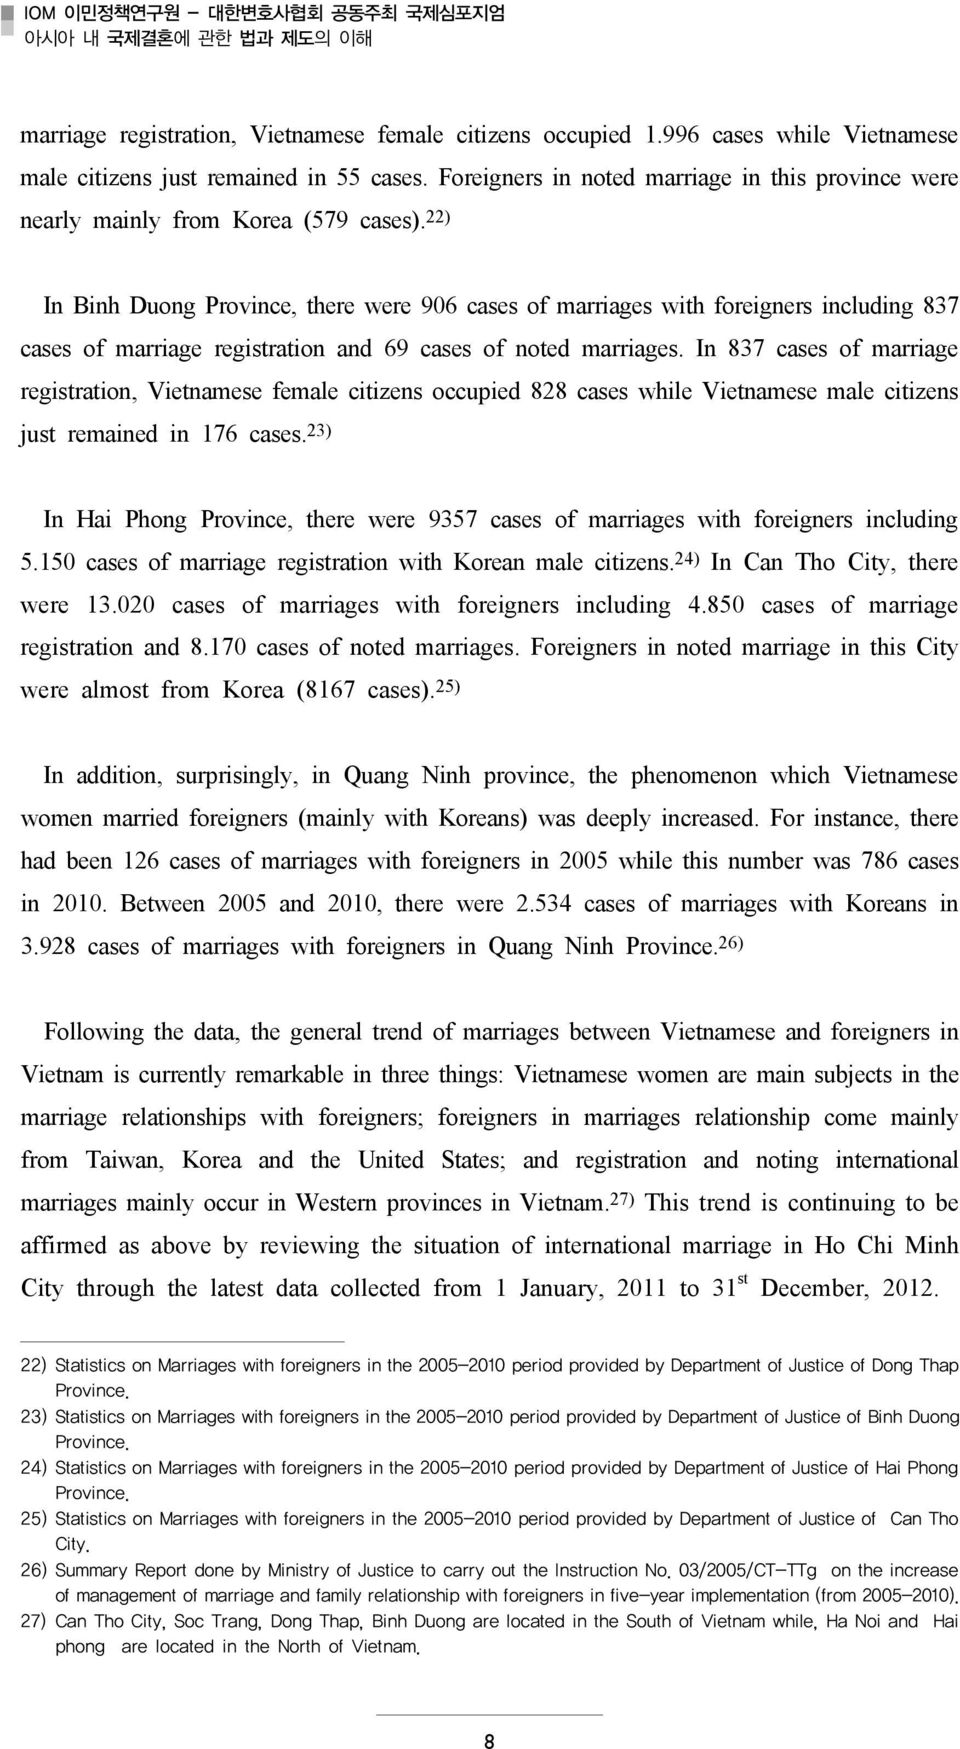 22) In Binh Duong Province, there were 906 cases of marriages with foreigners including 837 cases of marriage registration and 69 cases of noted marriages.